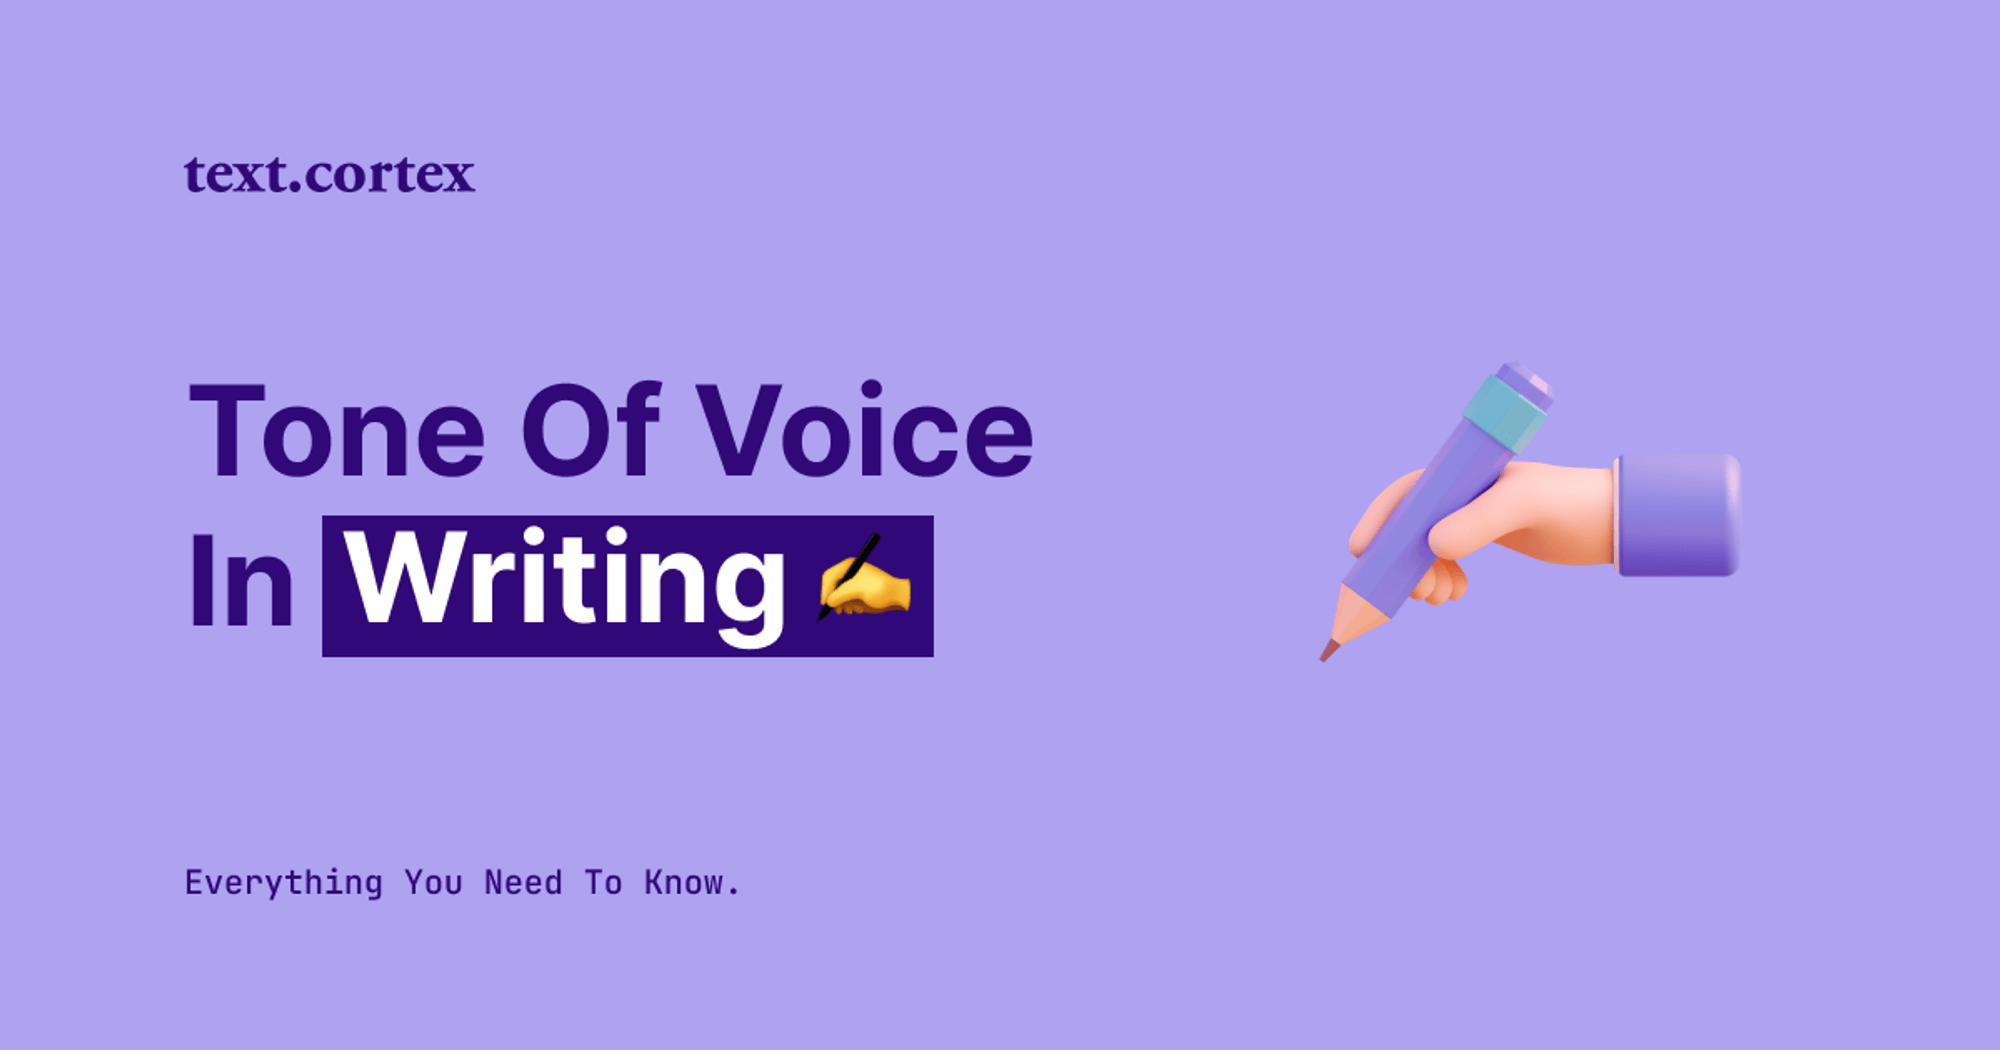 Tone of Voice in Writing - Everything You Need To Know